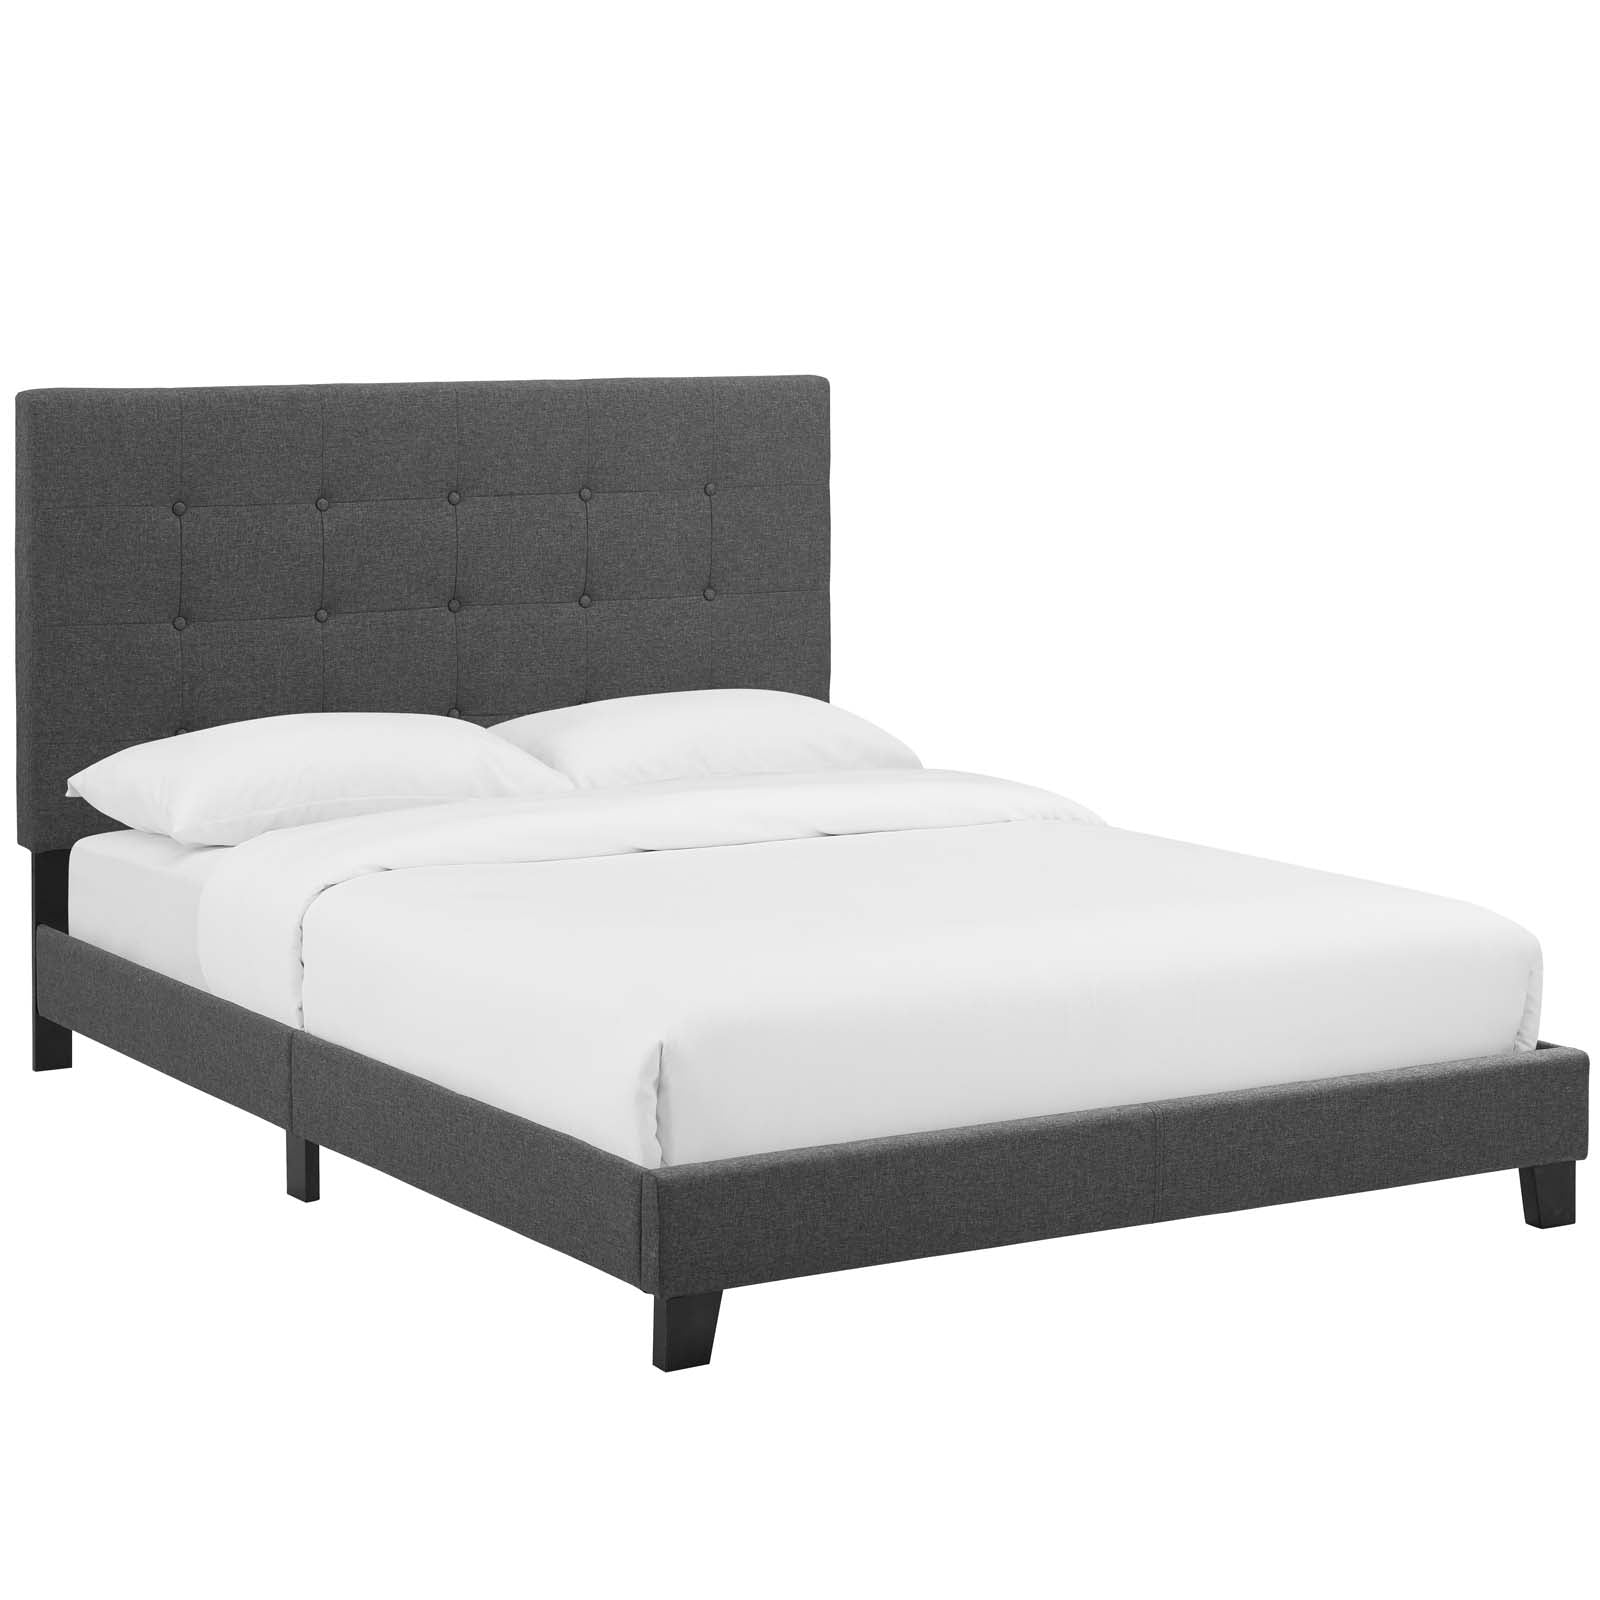 Modway Beds - Melanie Twin Tufted Button Upholstered Fabric Platform Bed Gray